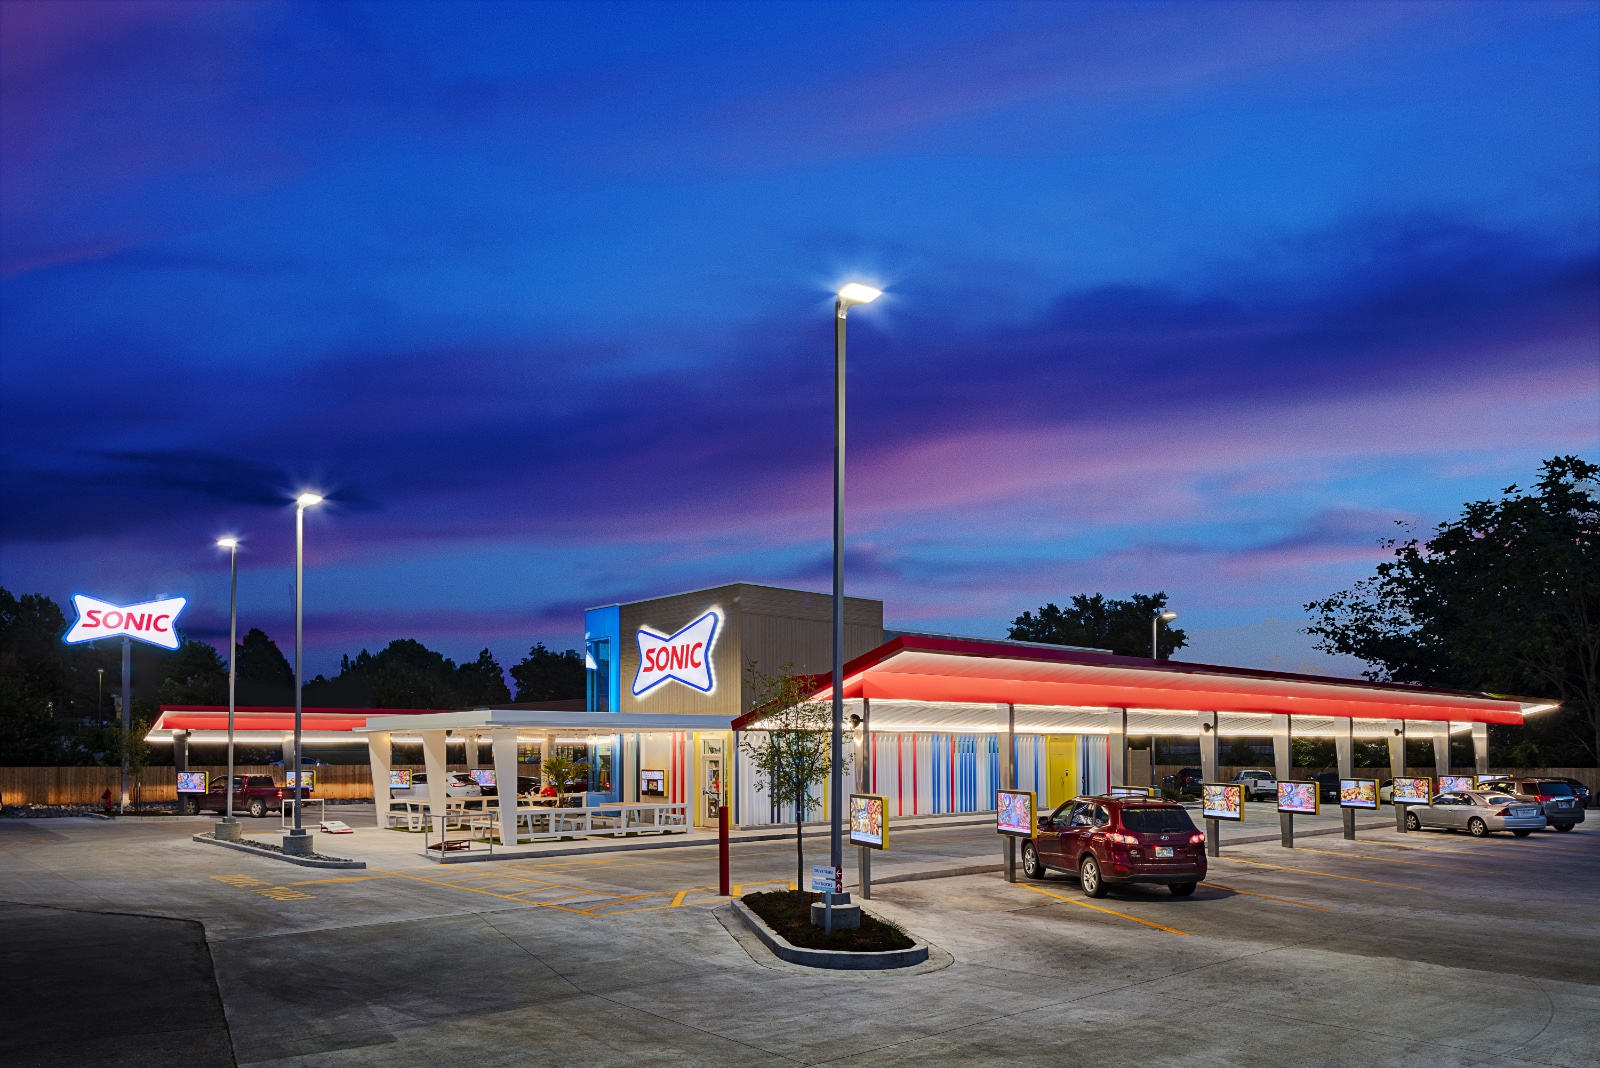 Embrace Opportunities with SONIC: Take advantage of limited-time incentives and invest in a brand that's revolutionizing the quick-service restaurant industry. Join the SONIC family and unlock significant growth potential.